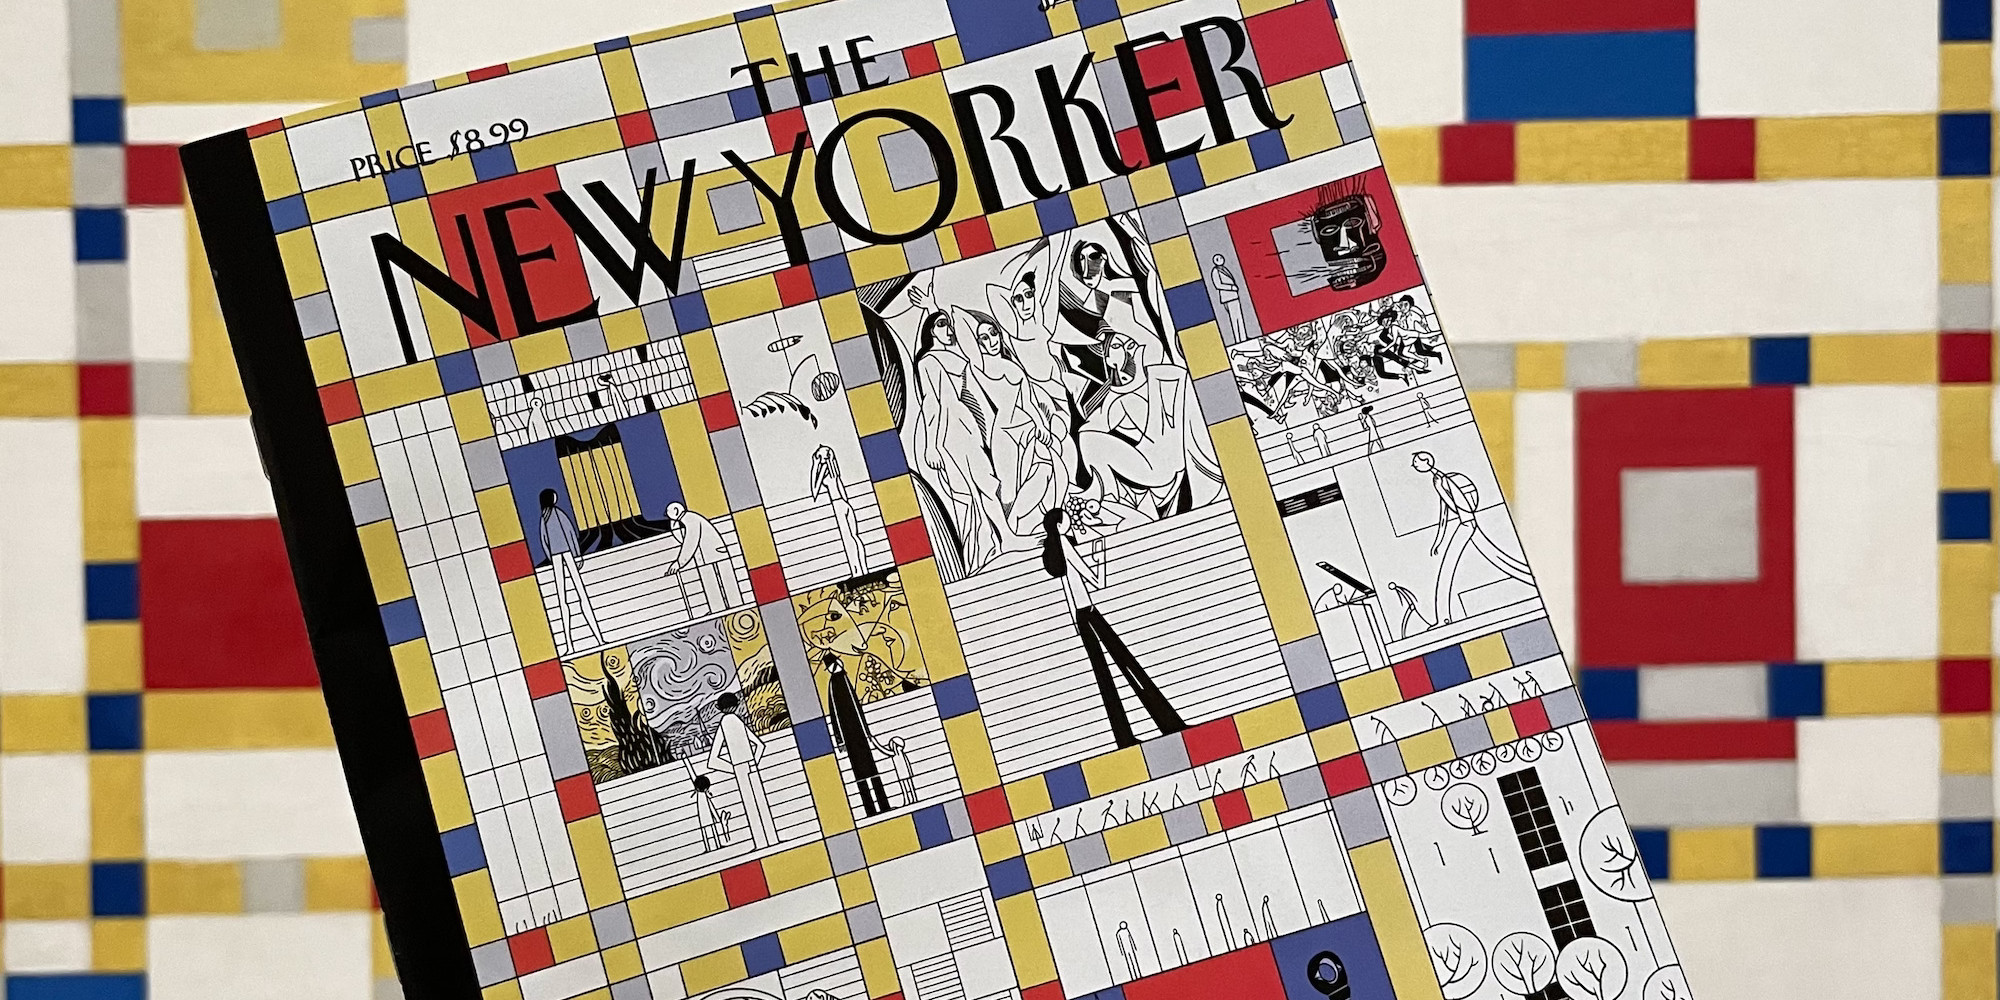 The January 31, 2022, issue of The New Yorker in front of Piet Mondrian’s Broadway Boogie Woogie at The Museum of Modern Art